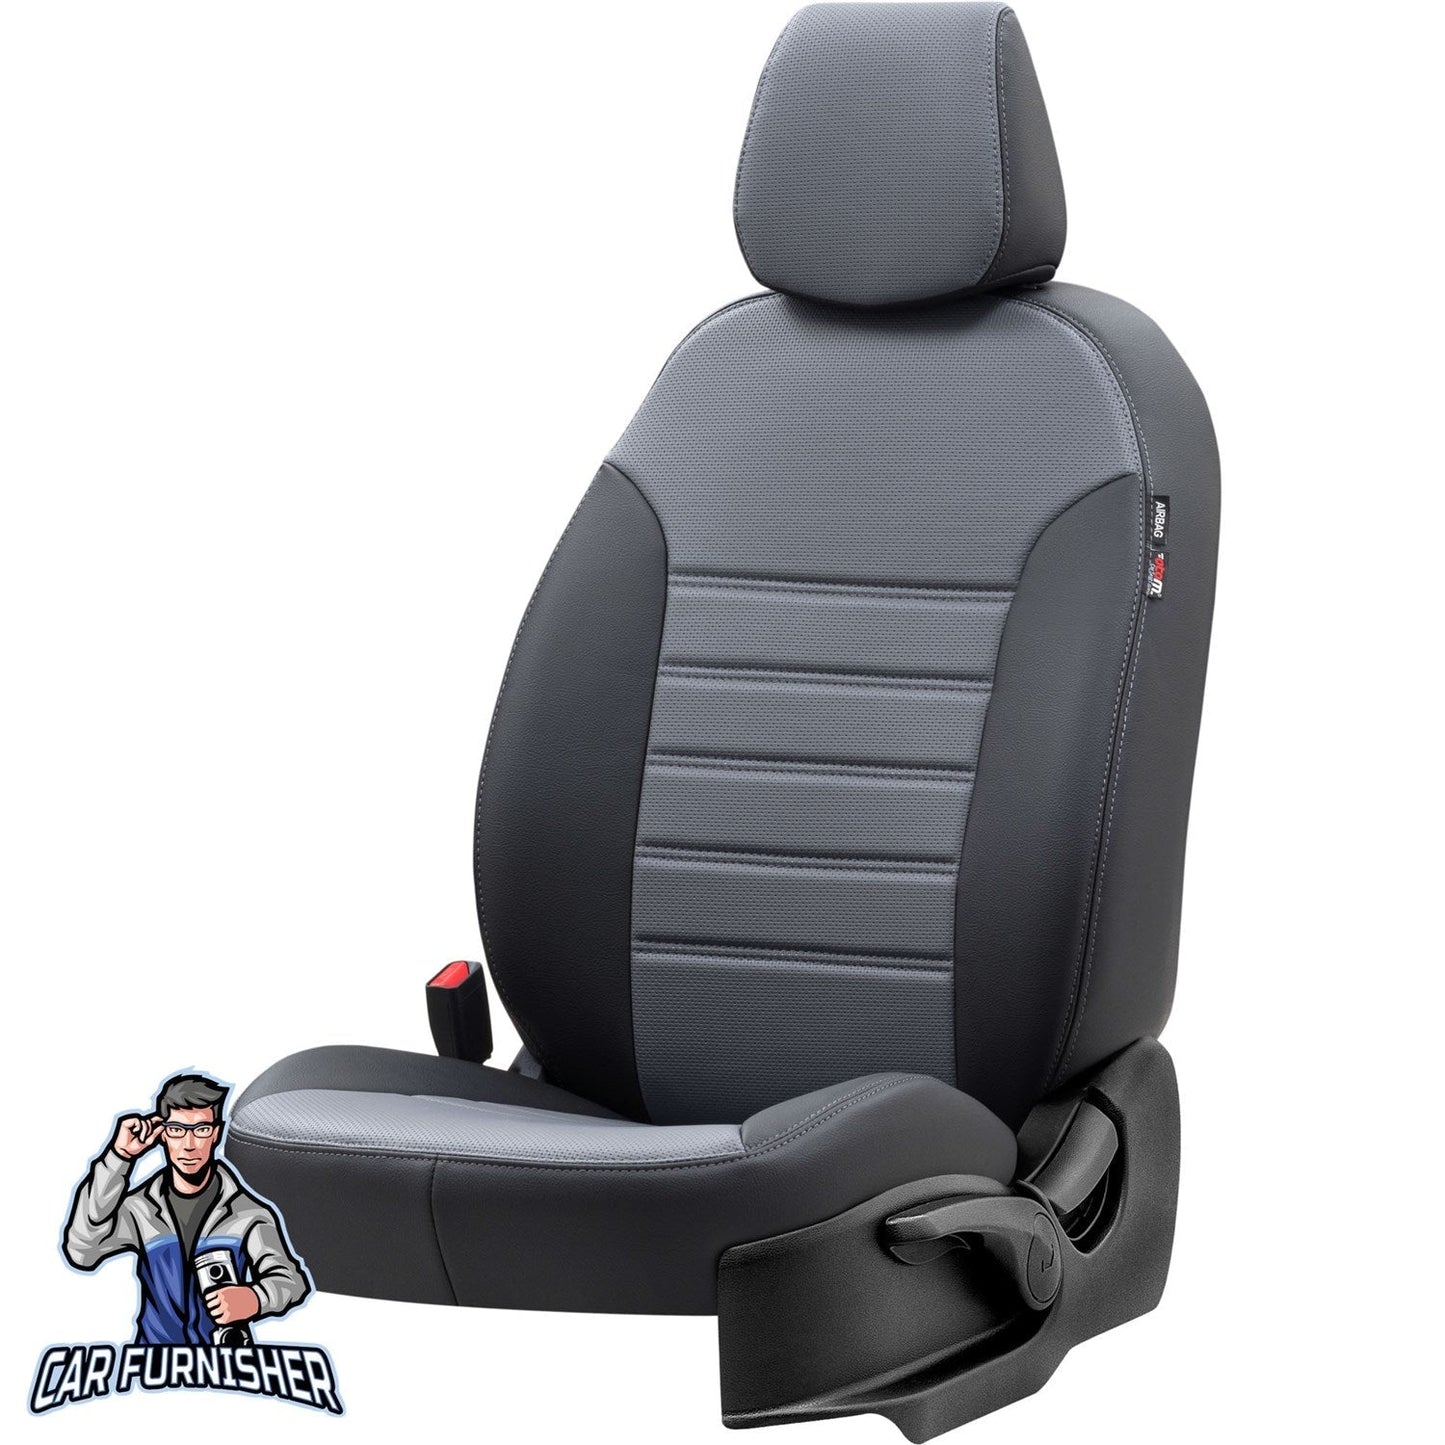 Iveco Eurocargo Seat Cover New York Leather Design Smoked Black Leather